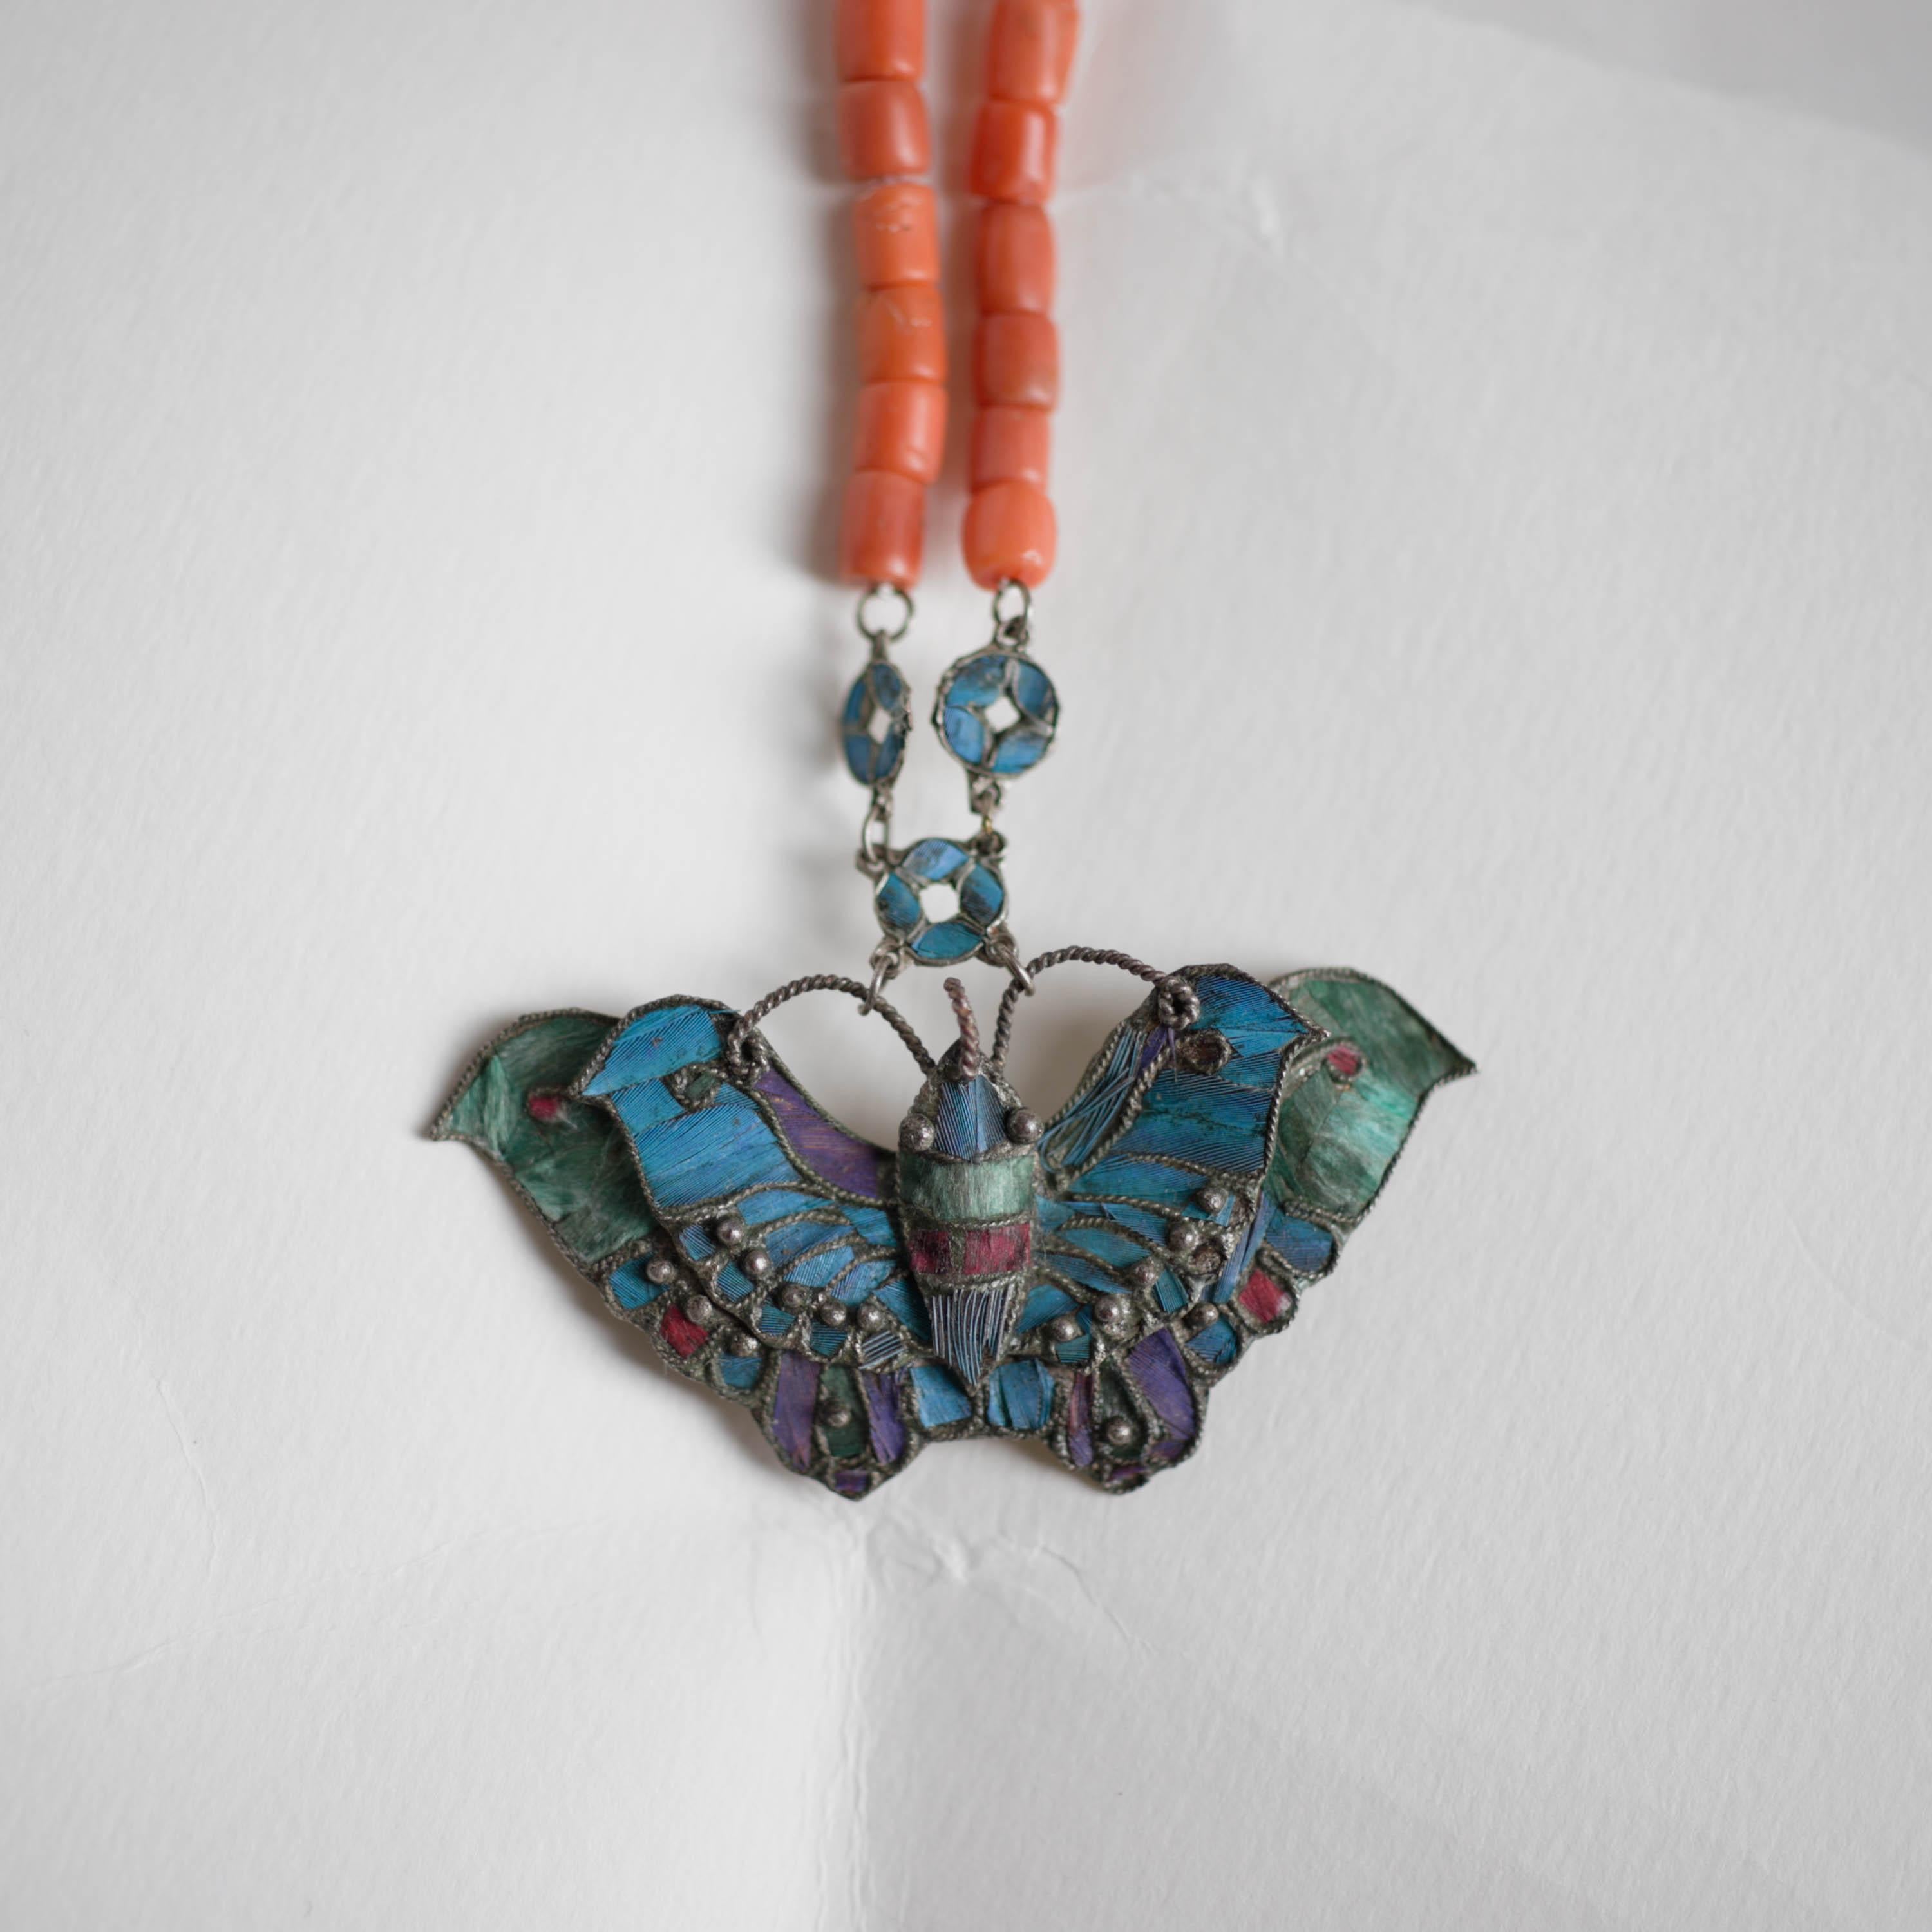 Chinese Antique Art Nouveau Coral and Kingfisher Tian-Tsui Necklace In Excellent Condition For Sale In Southbury, CT